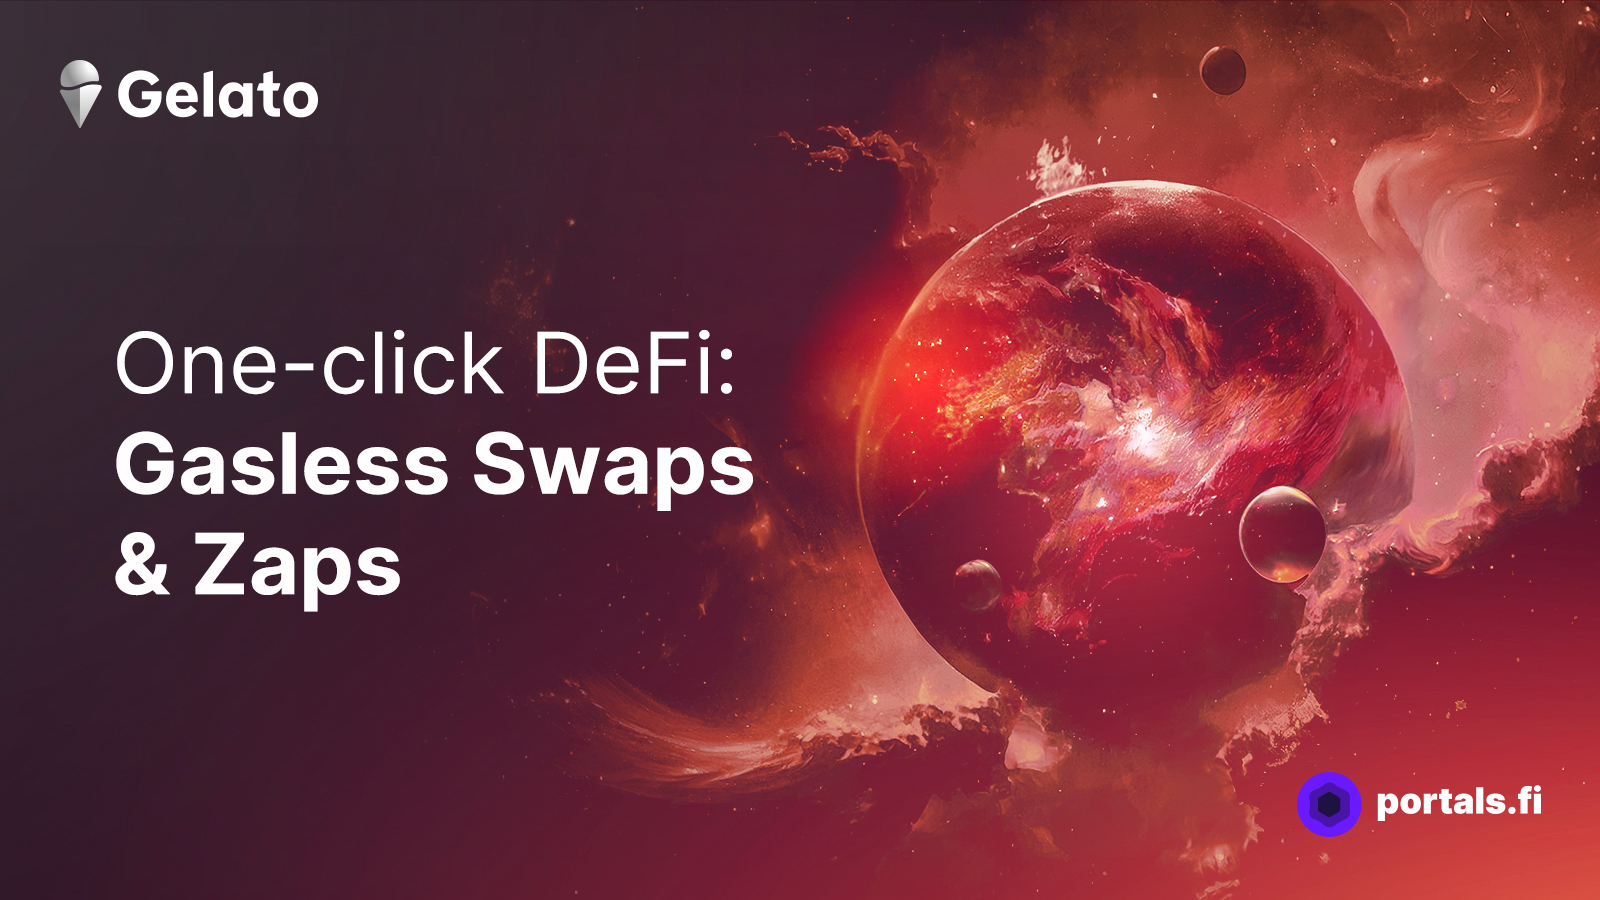 One-Click DeFi: Gasless Swaps & Zaps